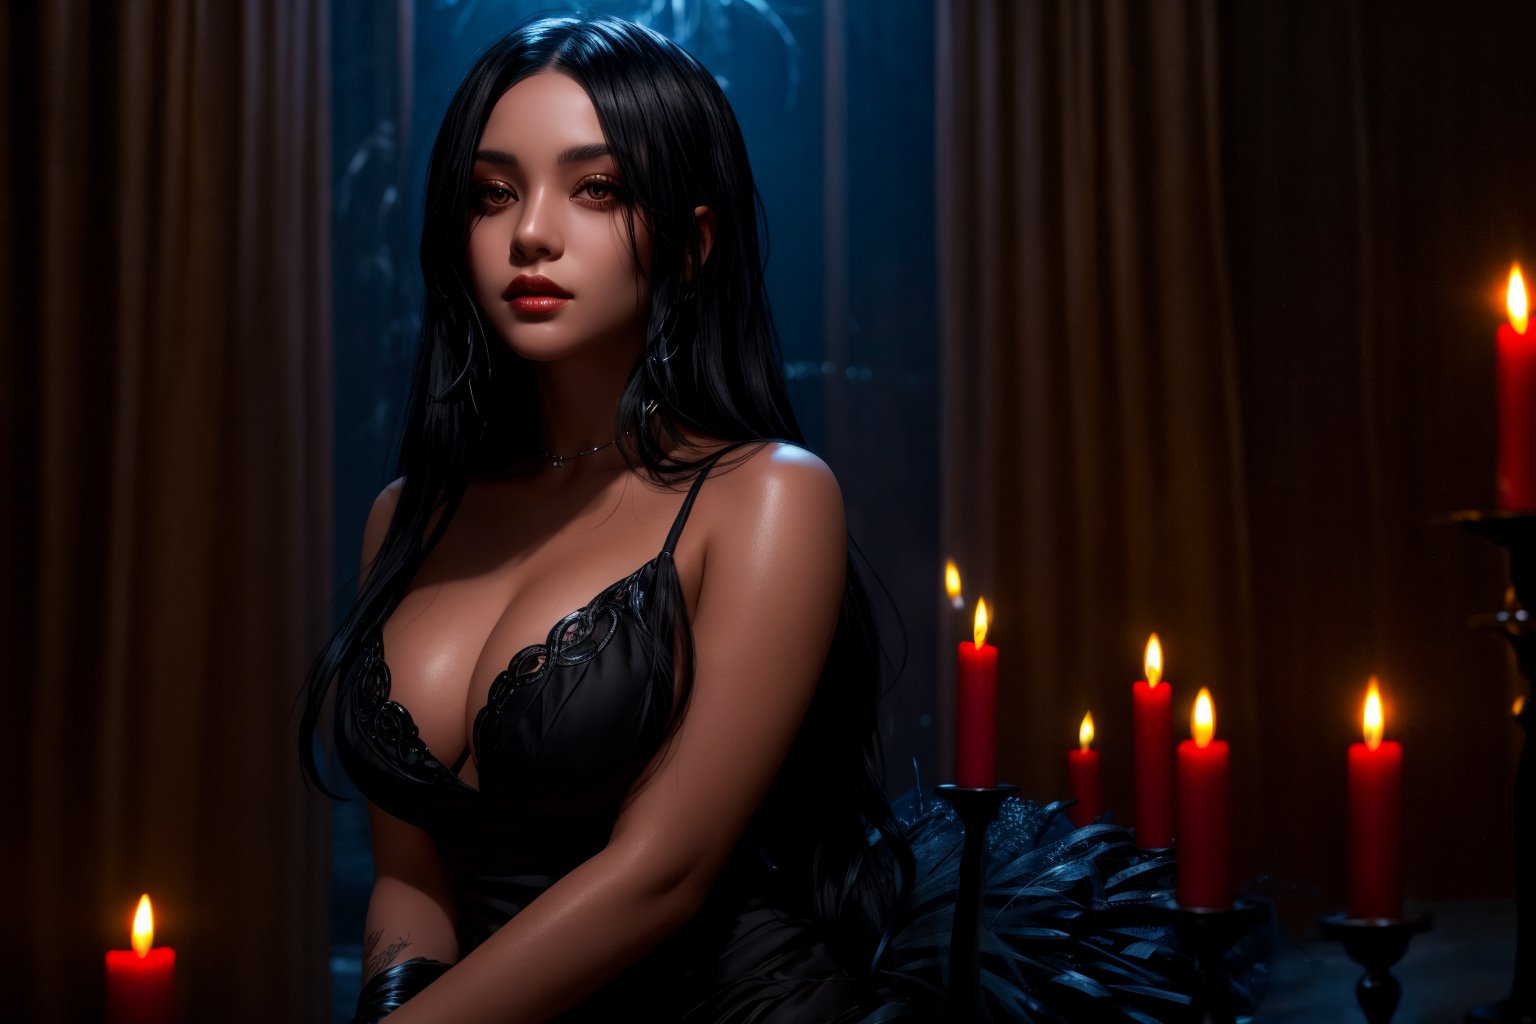 Raven-black hair flowing like a midnight river,  eyes deep pools of allure and mystery. Surrounded by the soft glow of twilight candles,  their flickering lights casting inviting shadows,  best quality,  tantalizing gaze,  sexy, 